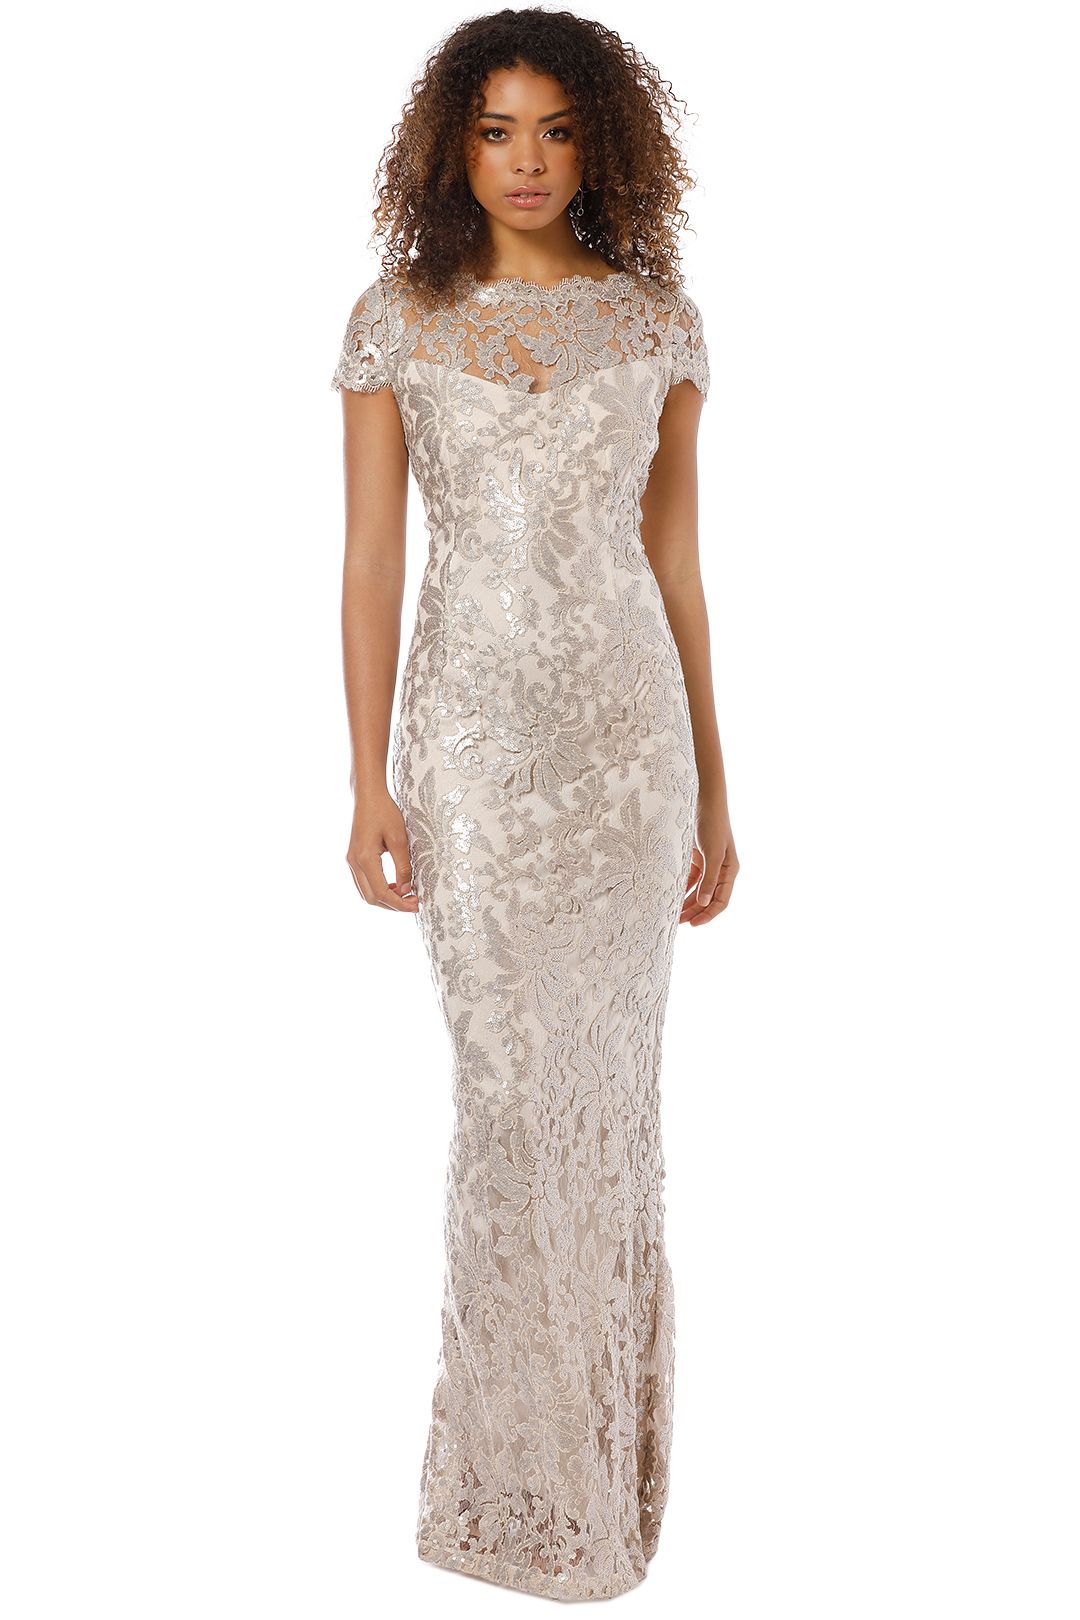 Montique - Aubrey Embroidered Lace Gown - Mink - Front